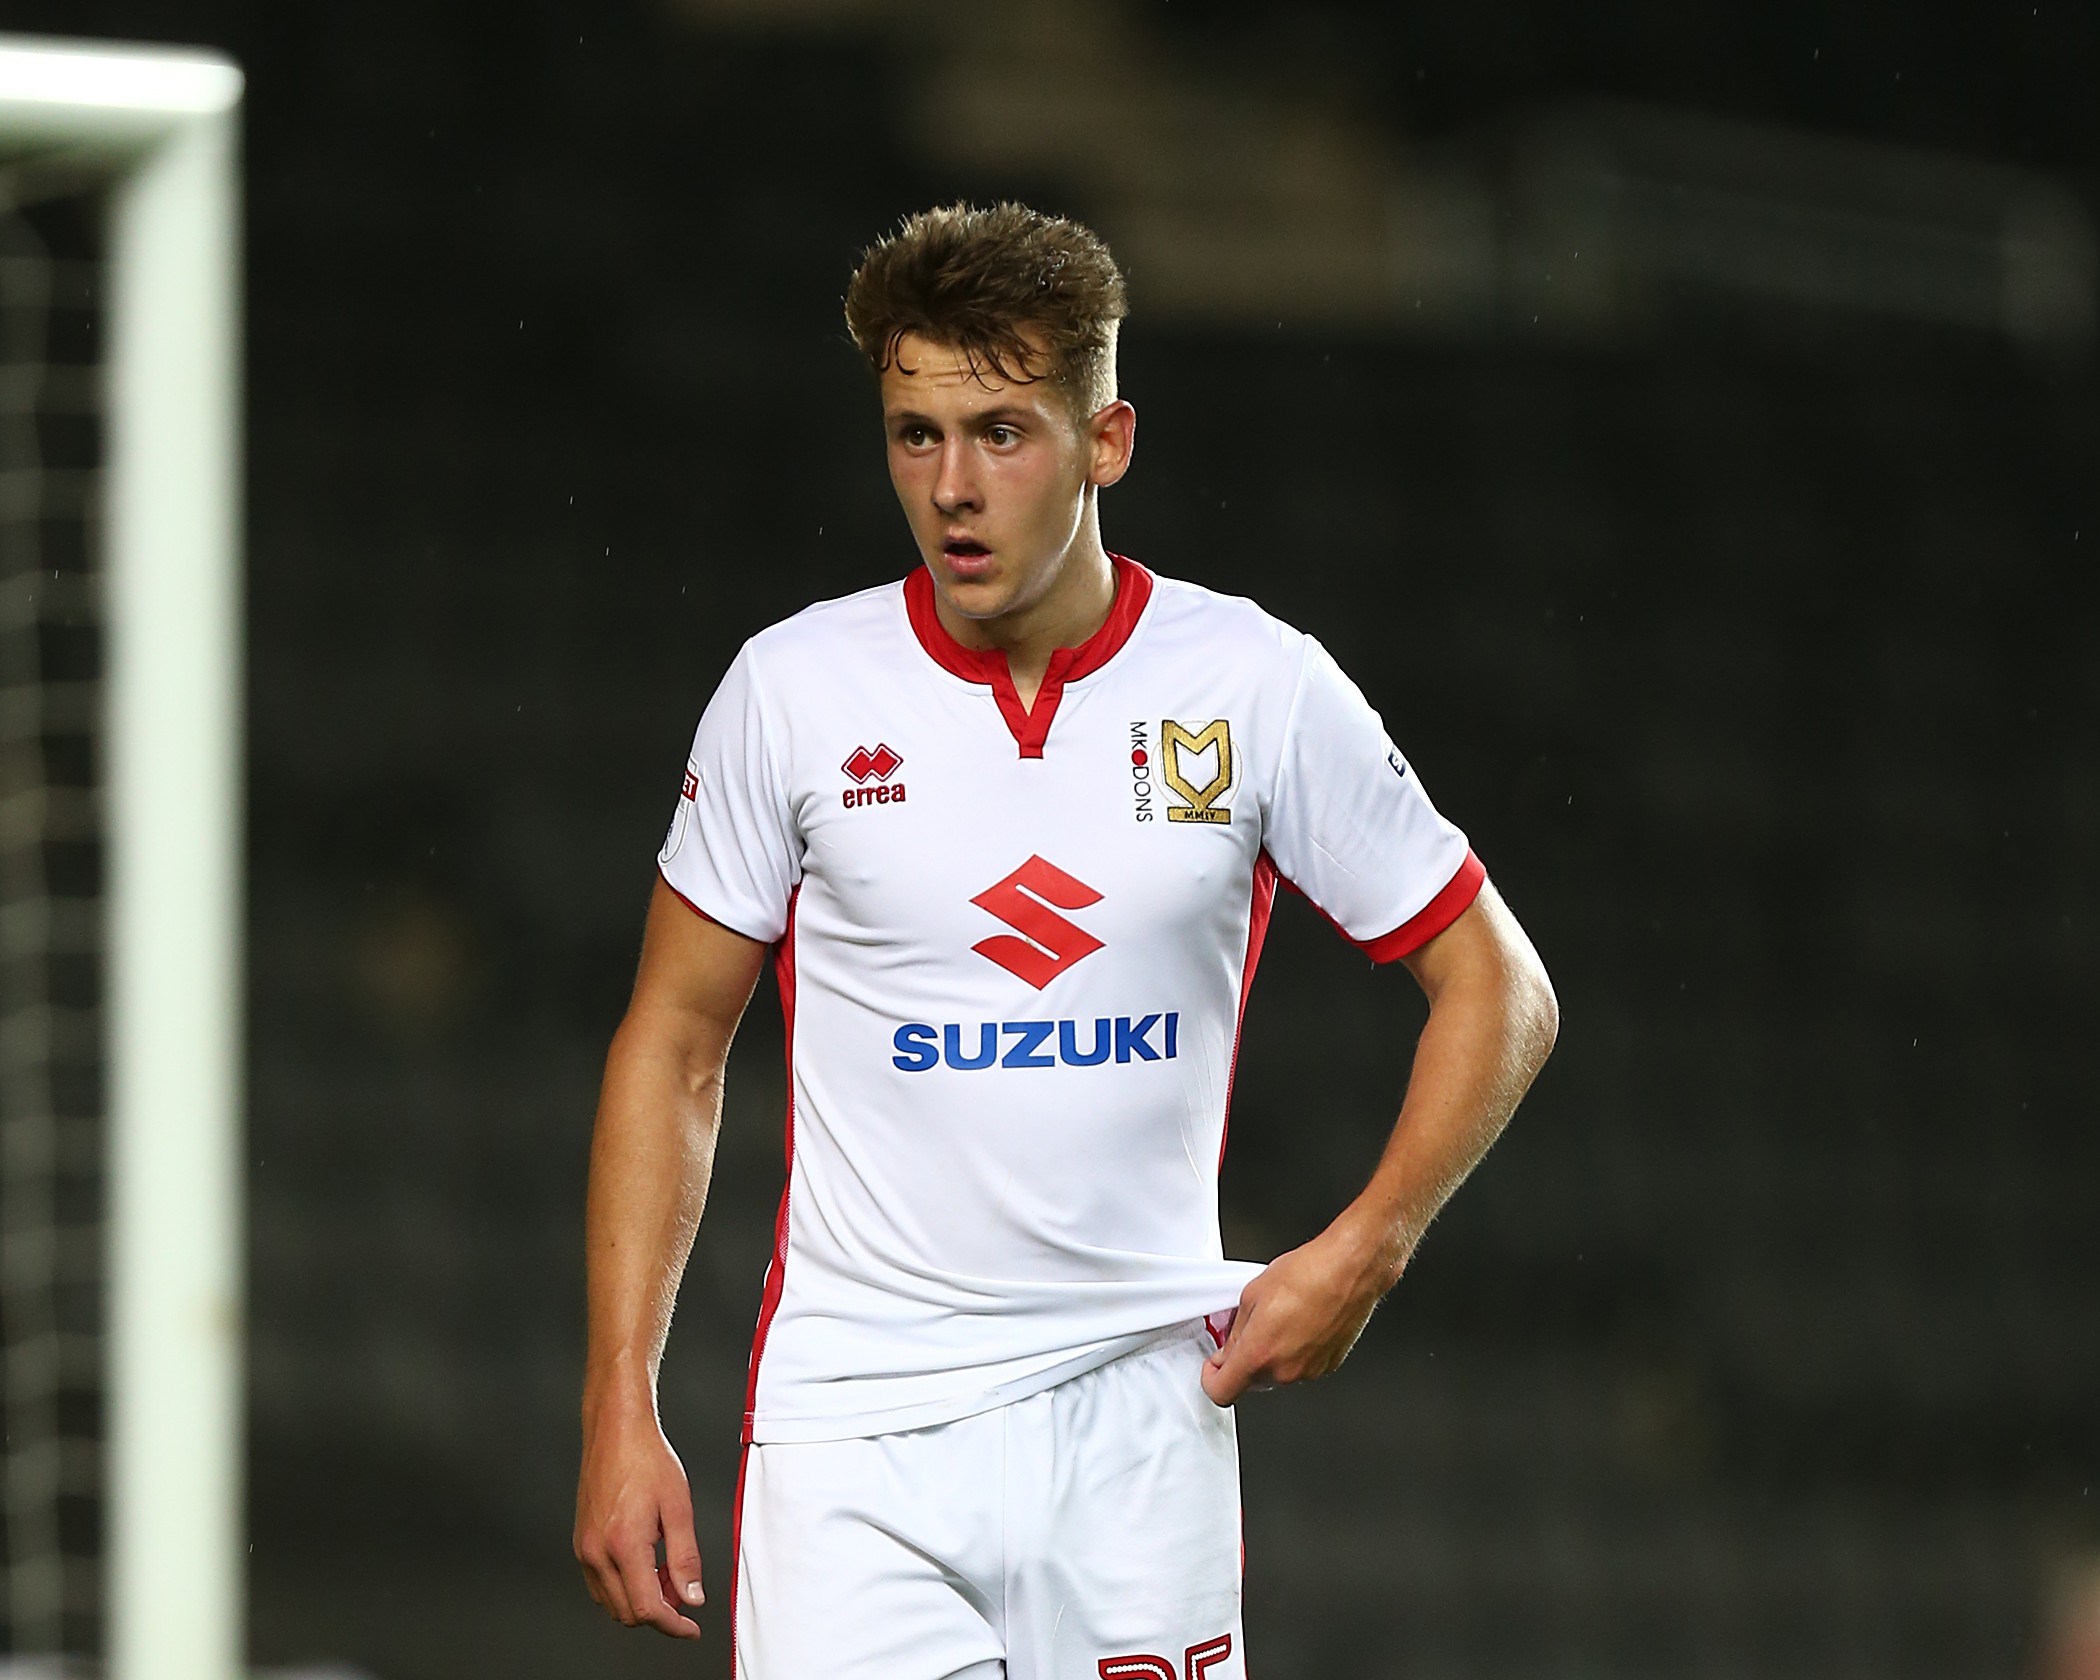 MILTON KEYNES, ENGLAND - AUGUST 22:  Callum Brittain of Milton Keynes Dons in action during the Carabao Cup Second Round match between Milton Keynes Dons and Swansea City at StadiumMK on August 22, 2017 in Milton Keynes, England.  (Photo by Pete Norton/Getty Images)